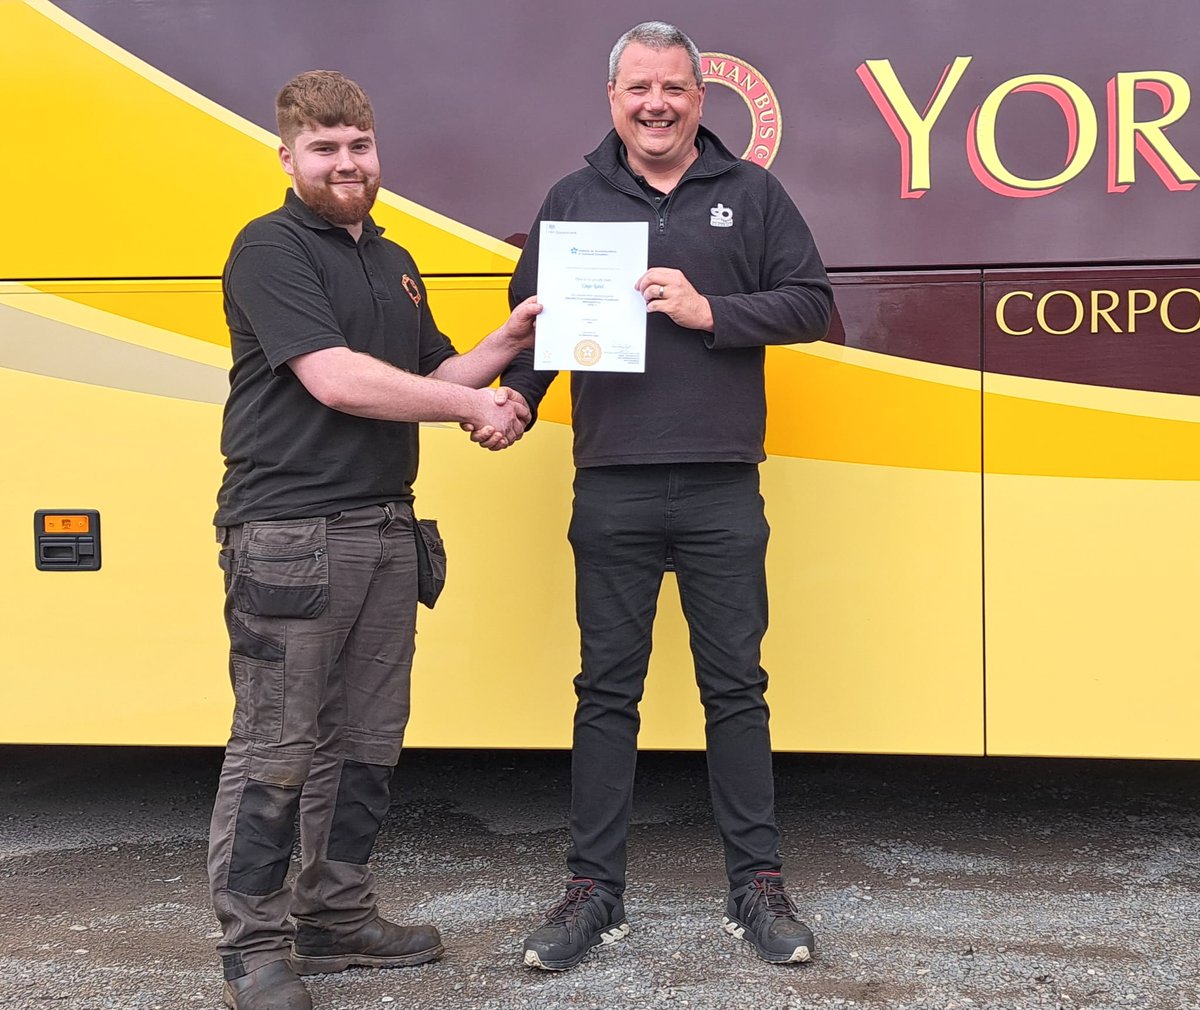 🎉We're delighted to announce a major milestone for our team member, Cayo! After 3yrs of dedication and hard work, he's officially a qualified Bus & Coach Engineer, completing his Level 3 Apprenticeship with flying colours. Read more here👇 yorkpullmanbus.co.uk/people/cayo/ @SandBAuto